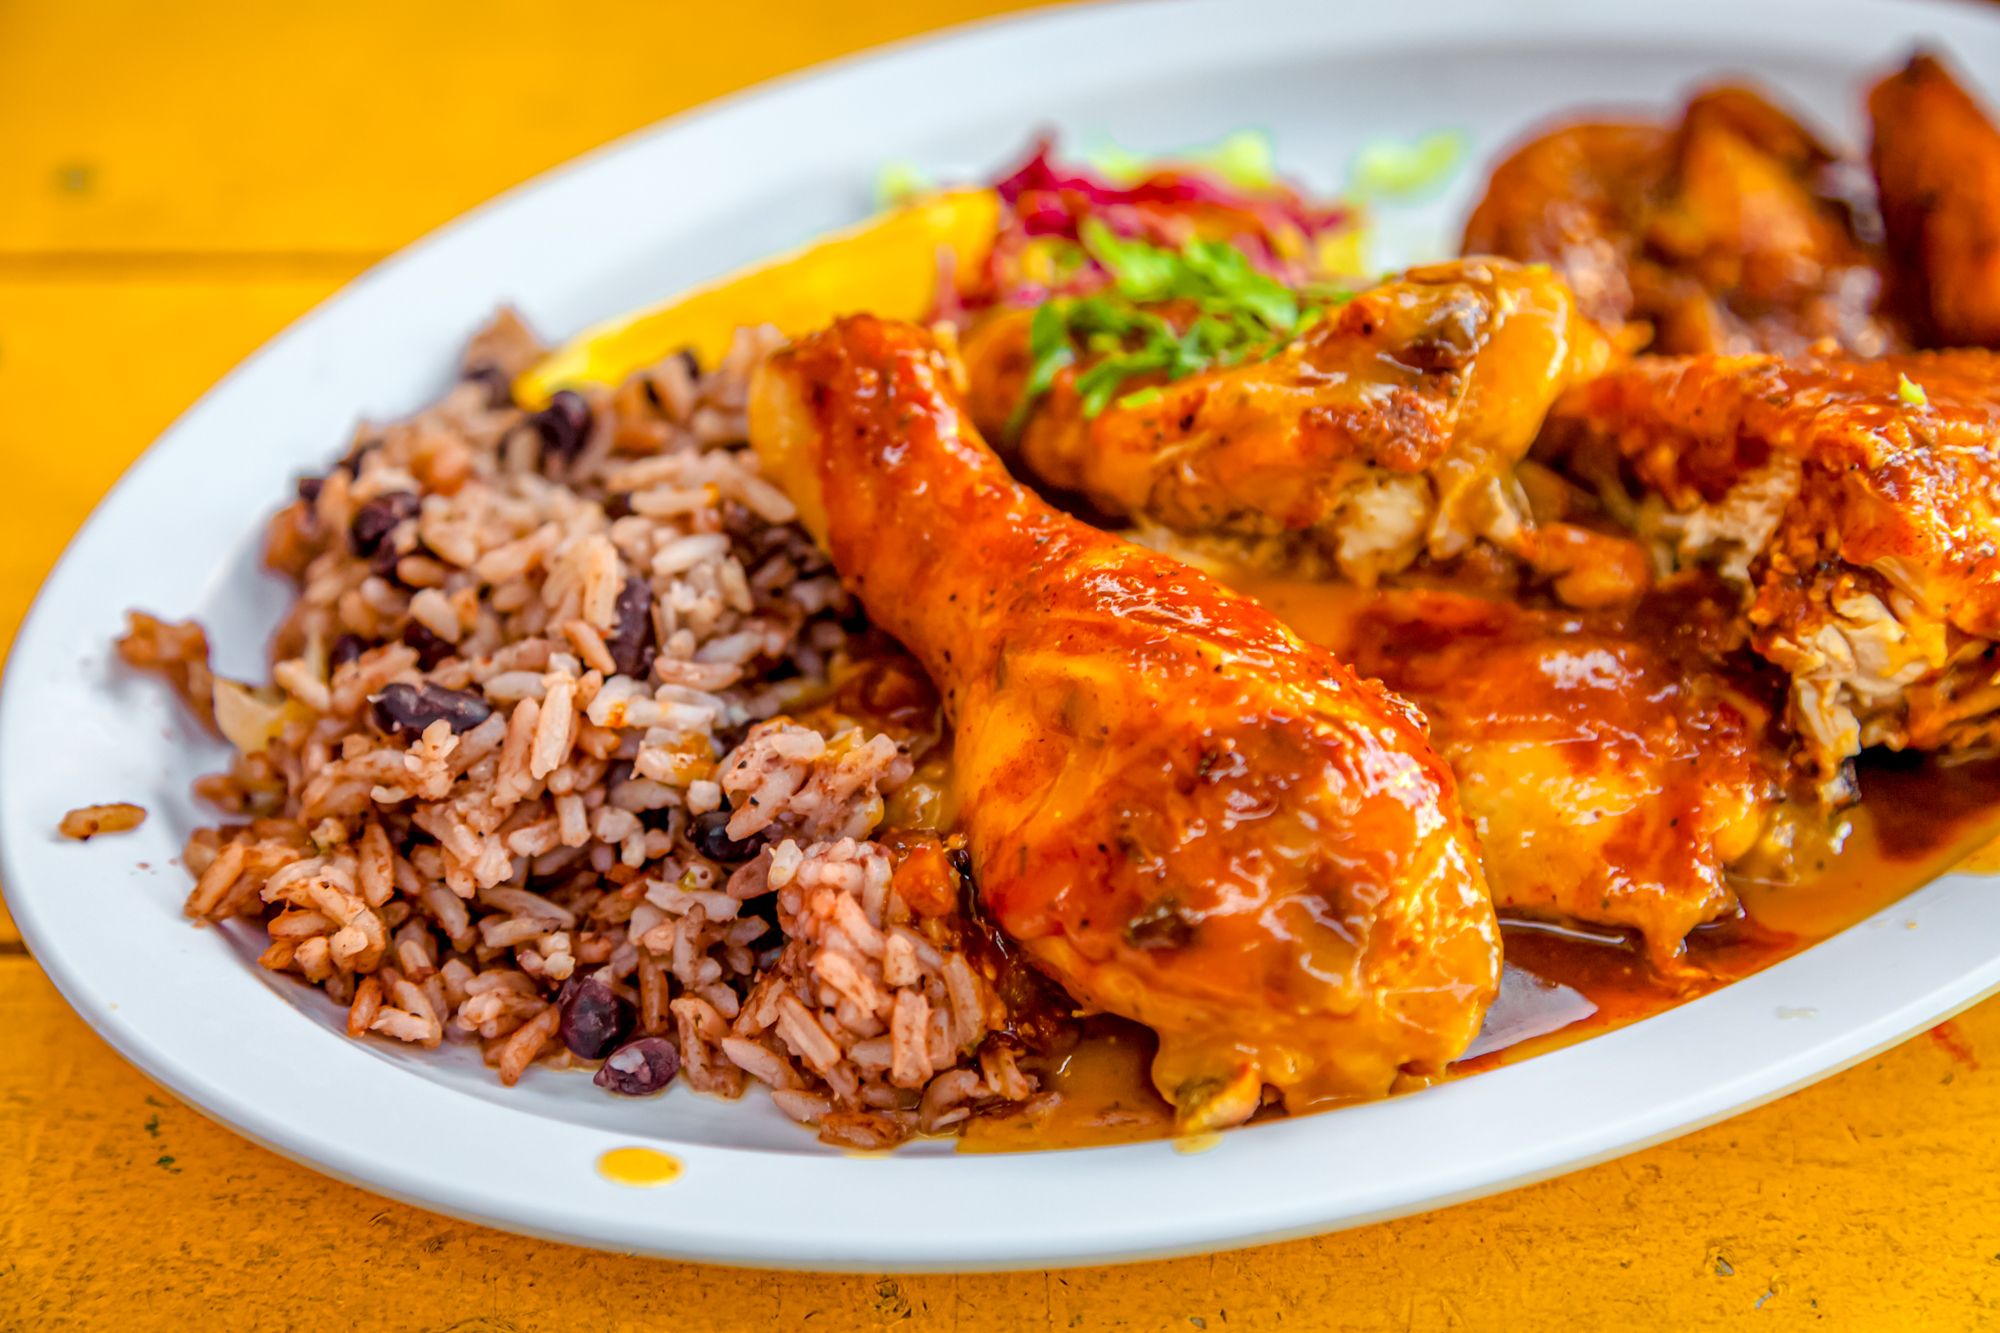 11 traditional main dishes in Jamaica you'll want to try